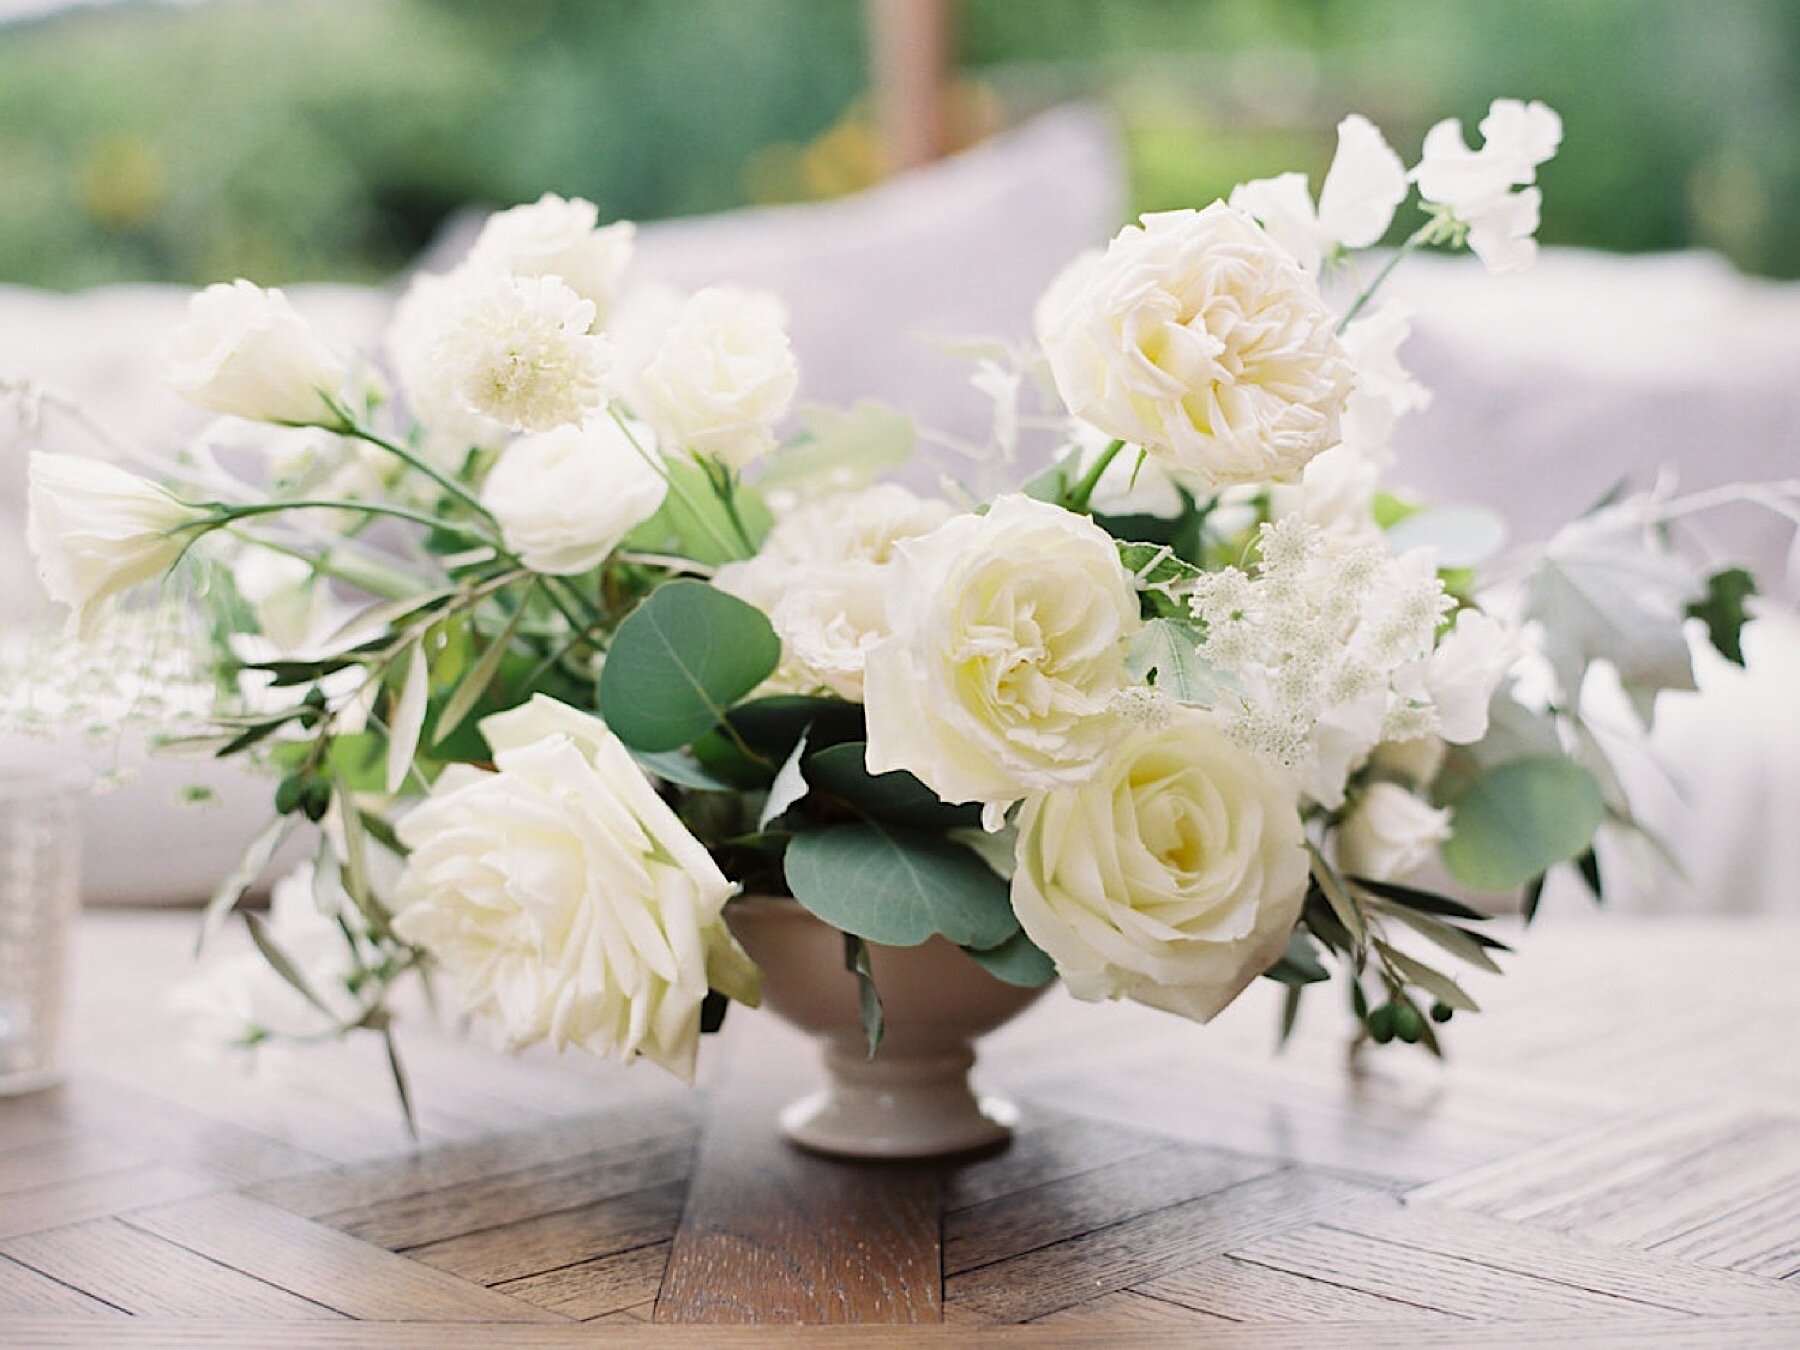 02_wedding_White_luxury_Lodge_green_Company_by_at_Design_and_florist_Seattle_Gather_Willows_top.jpg